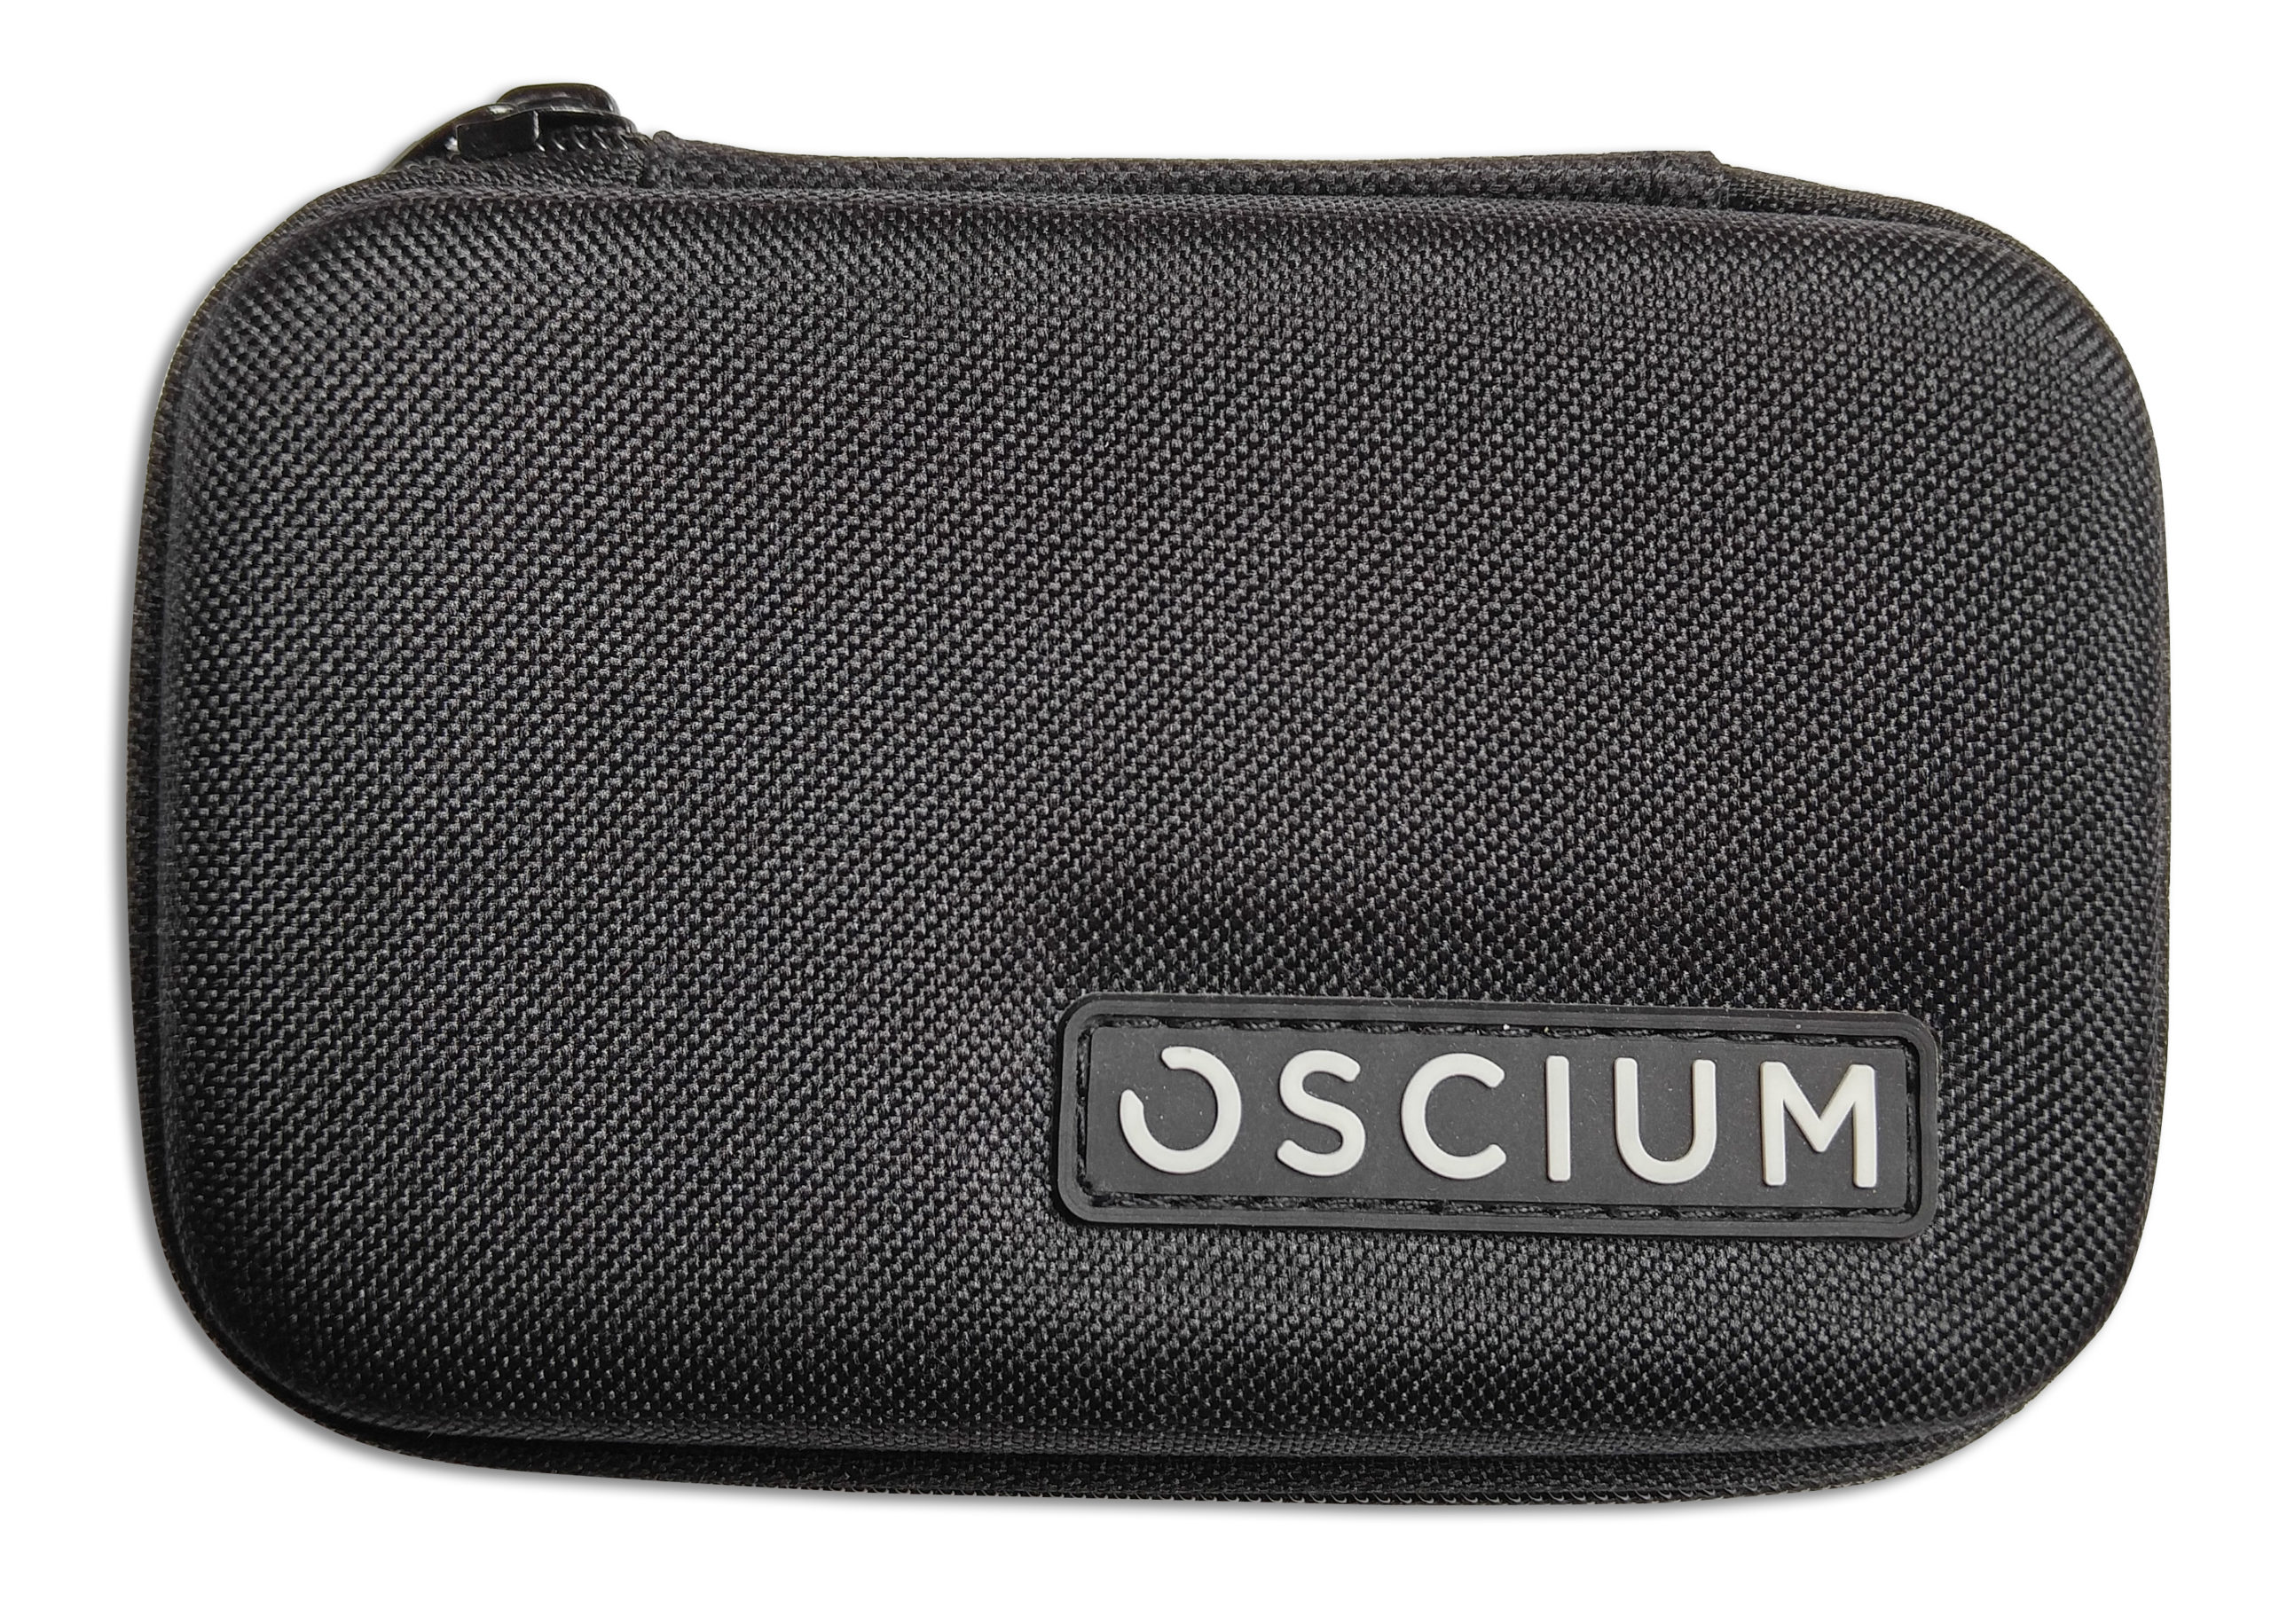 Top of Oscium WiPry carry case (with logo).